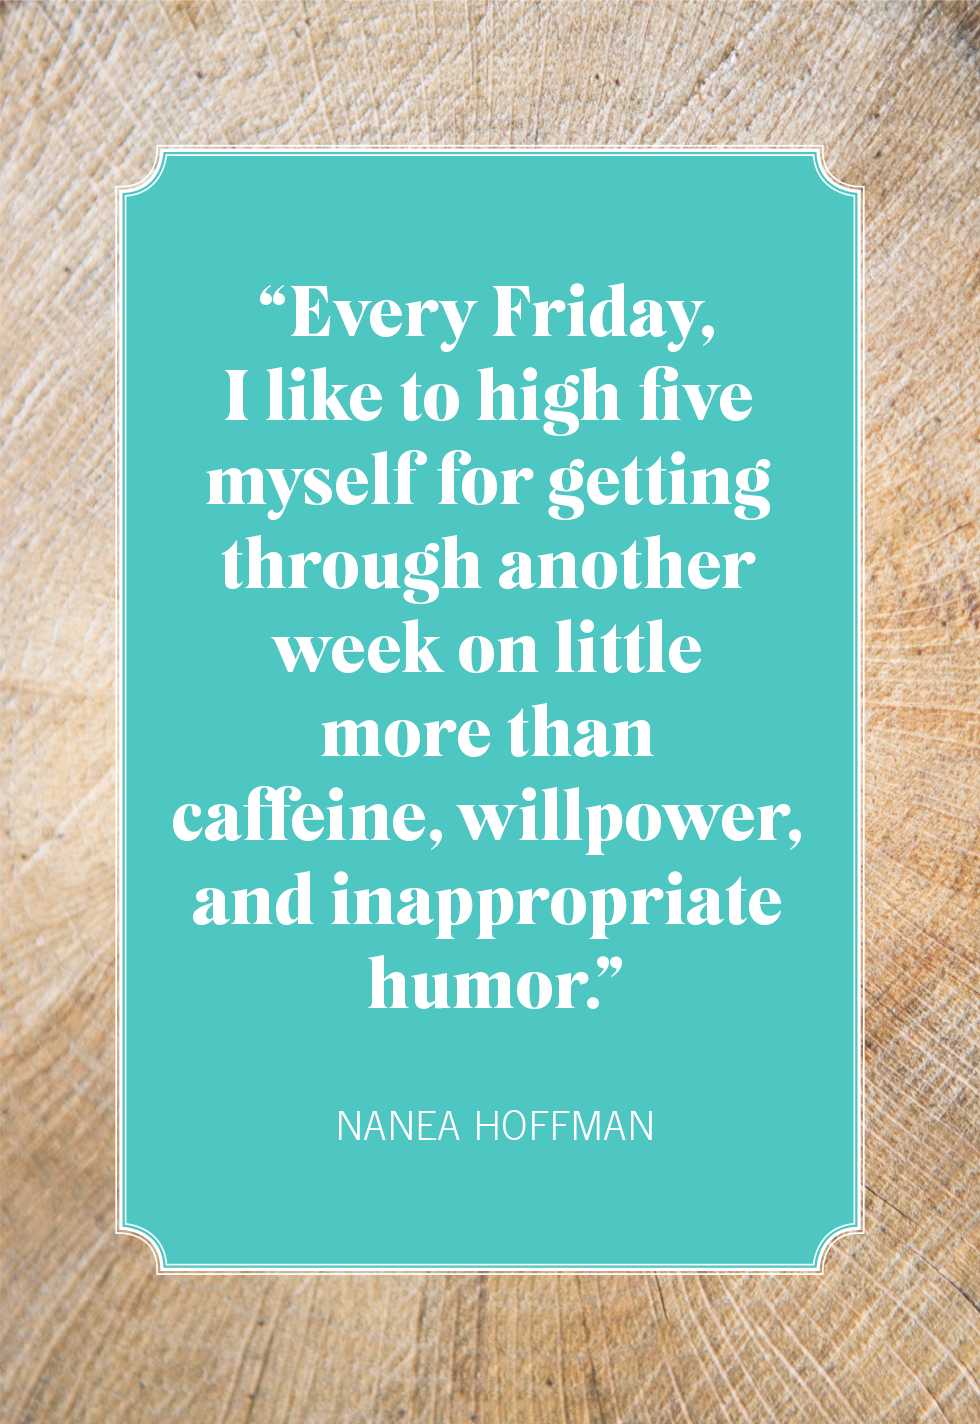 20 Best Friday Quotes to Kick Off the Weekend